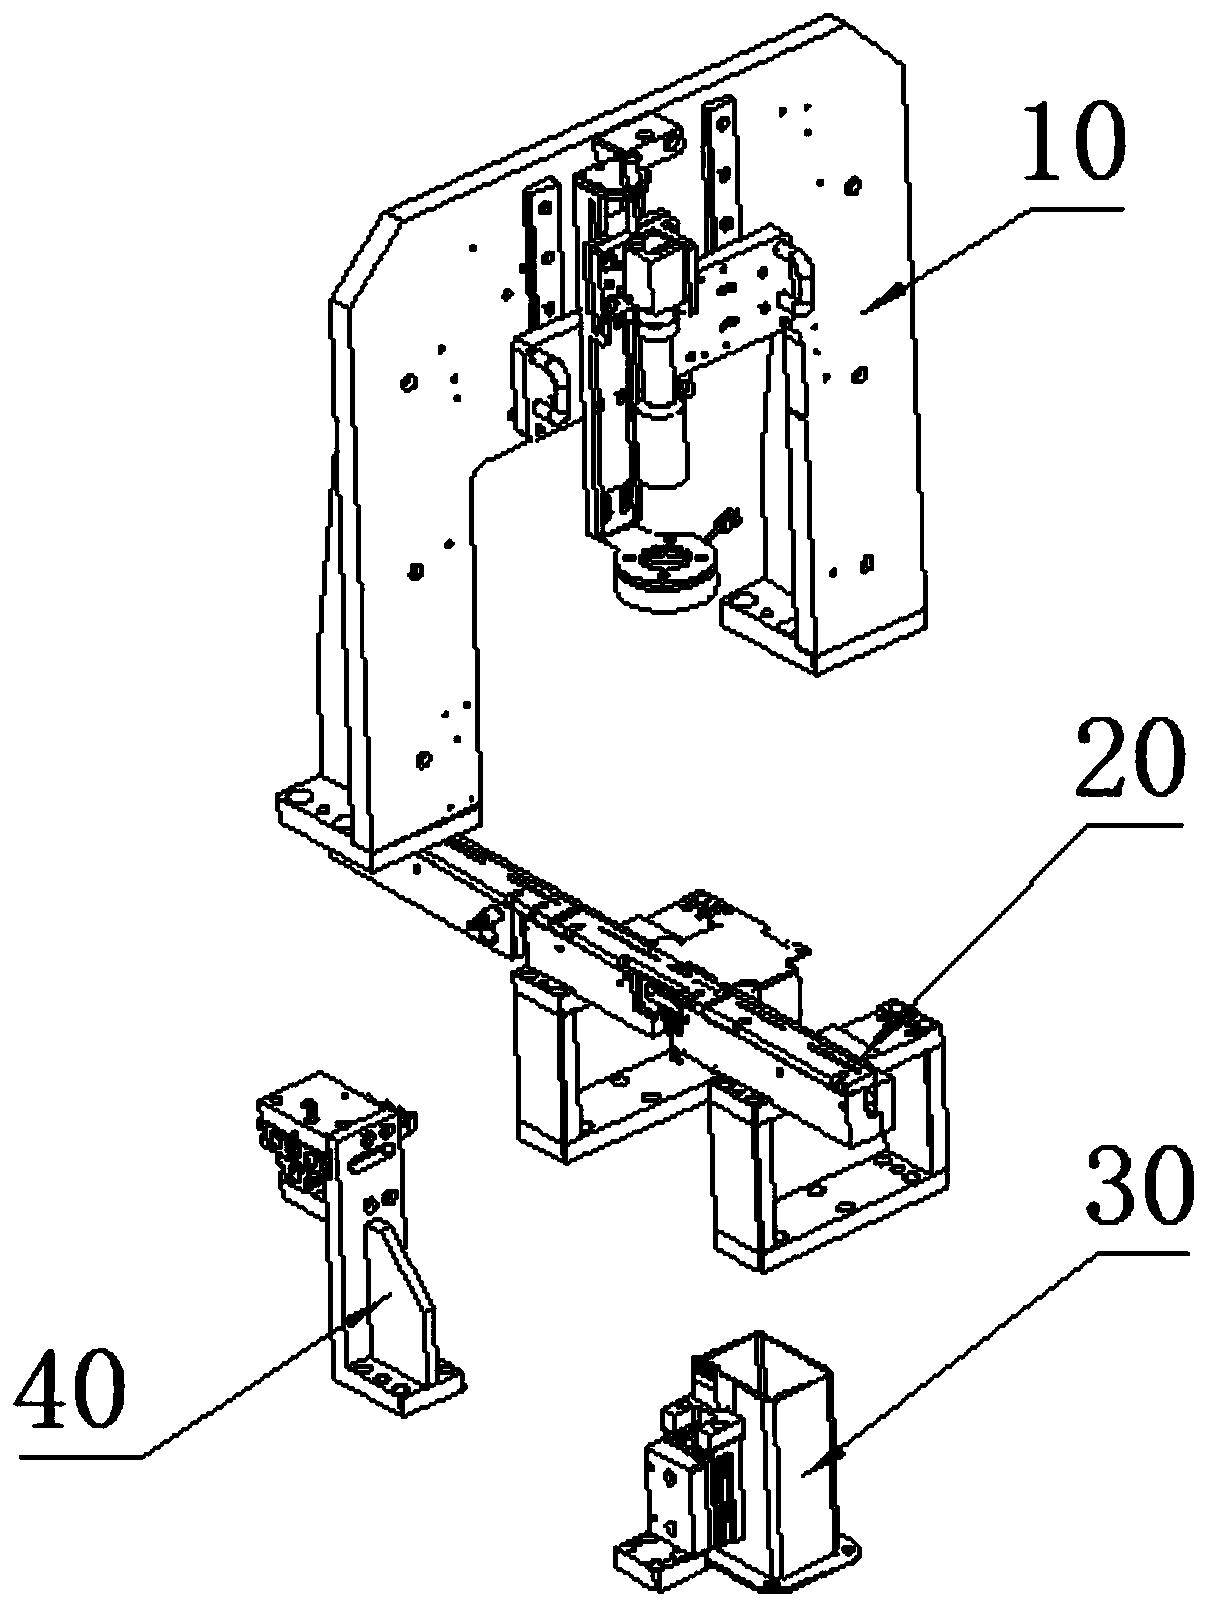 Device for high-speed detection of small hole of cartridge shell body